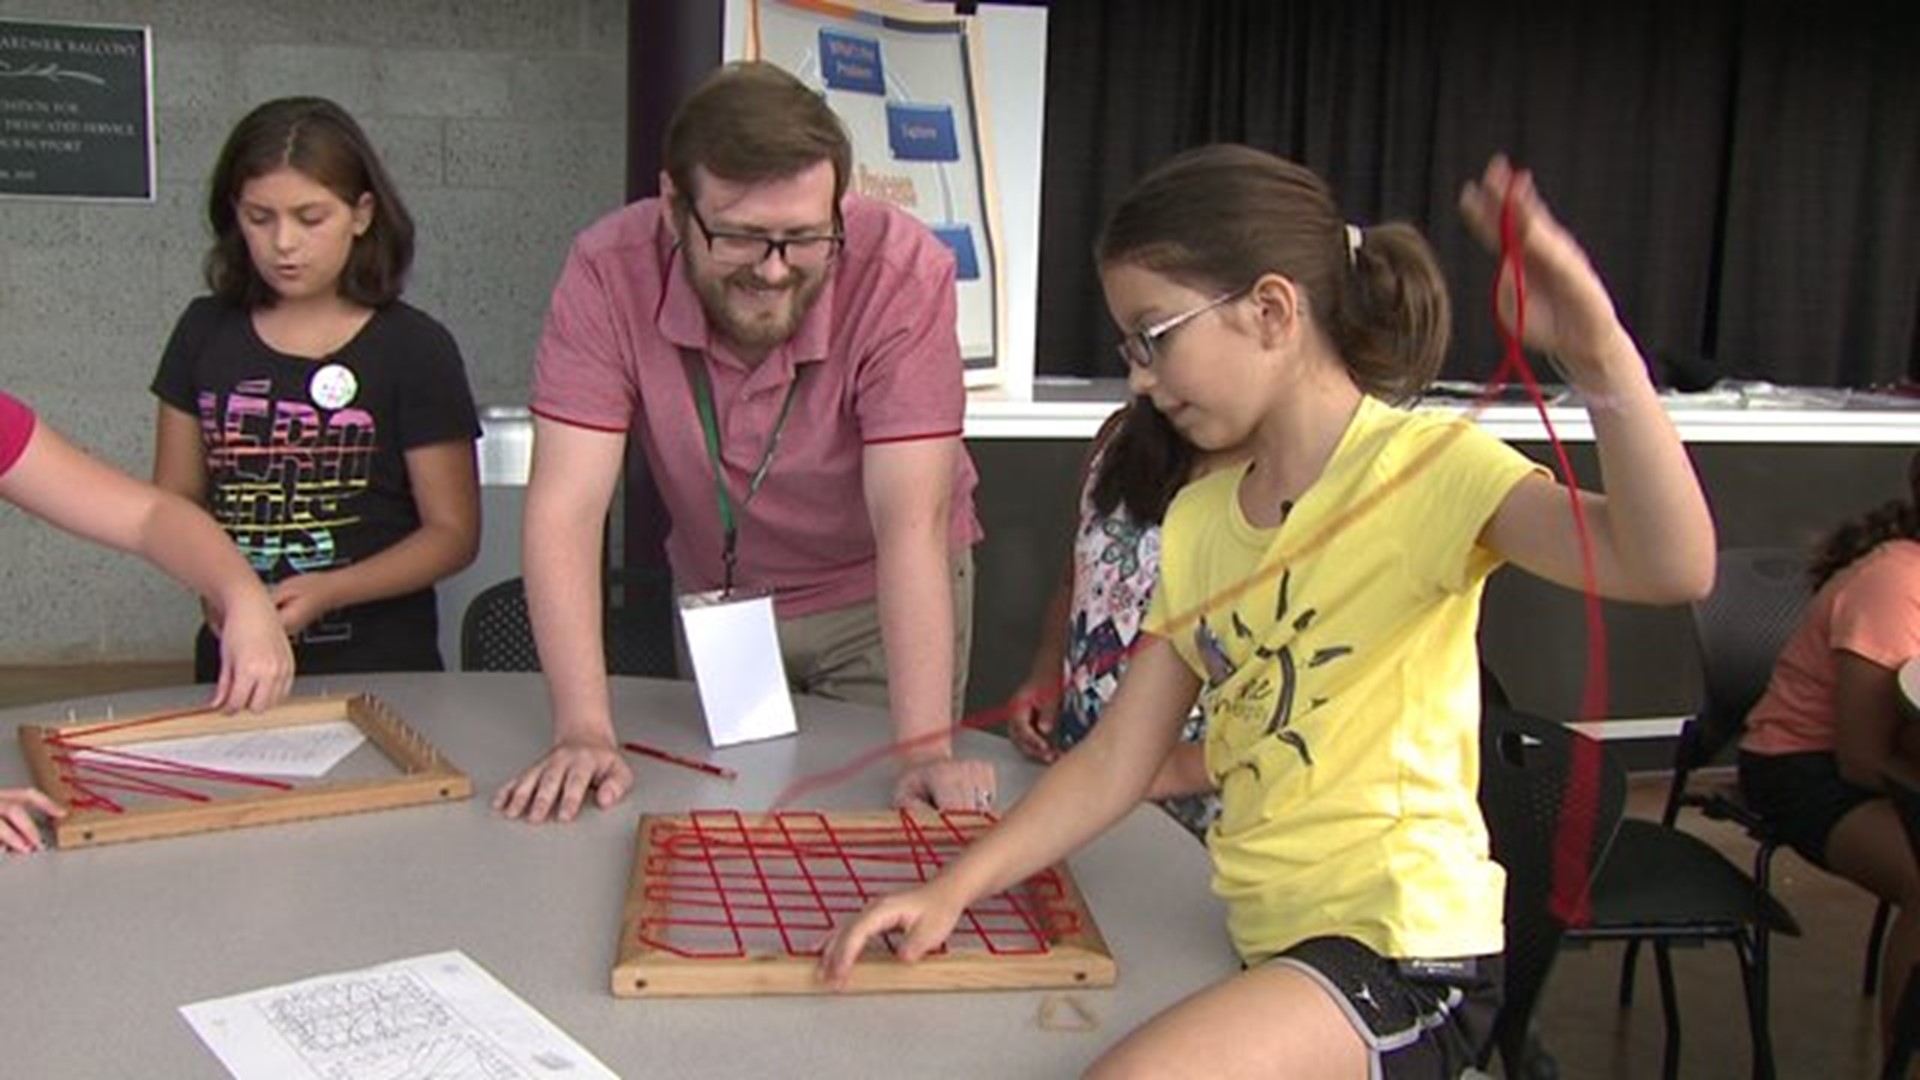 Engineering camp hopes to inspire young girls